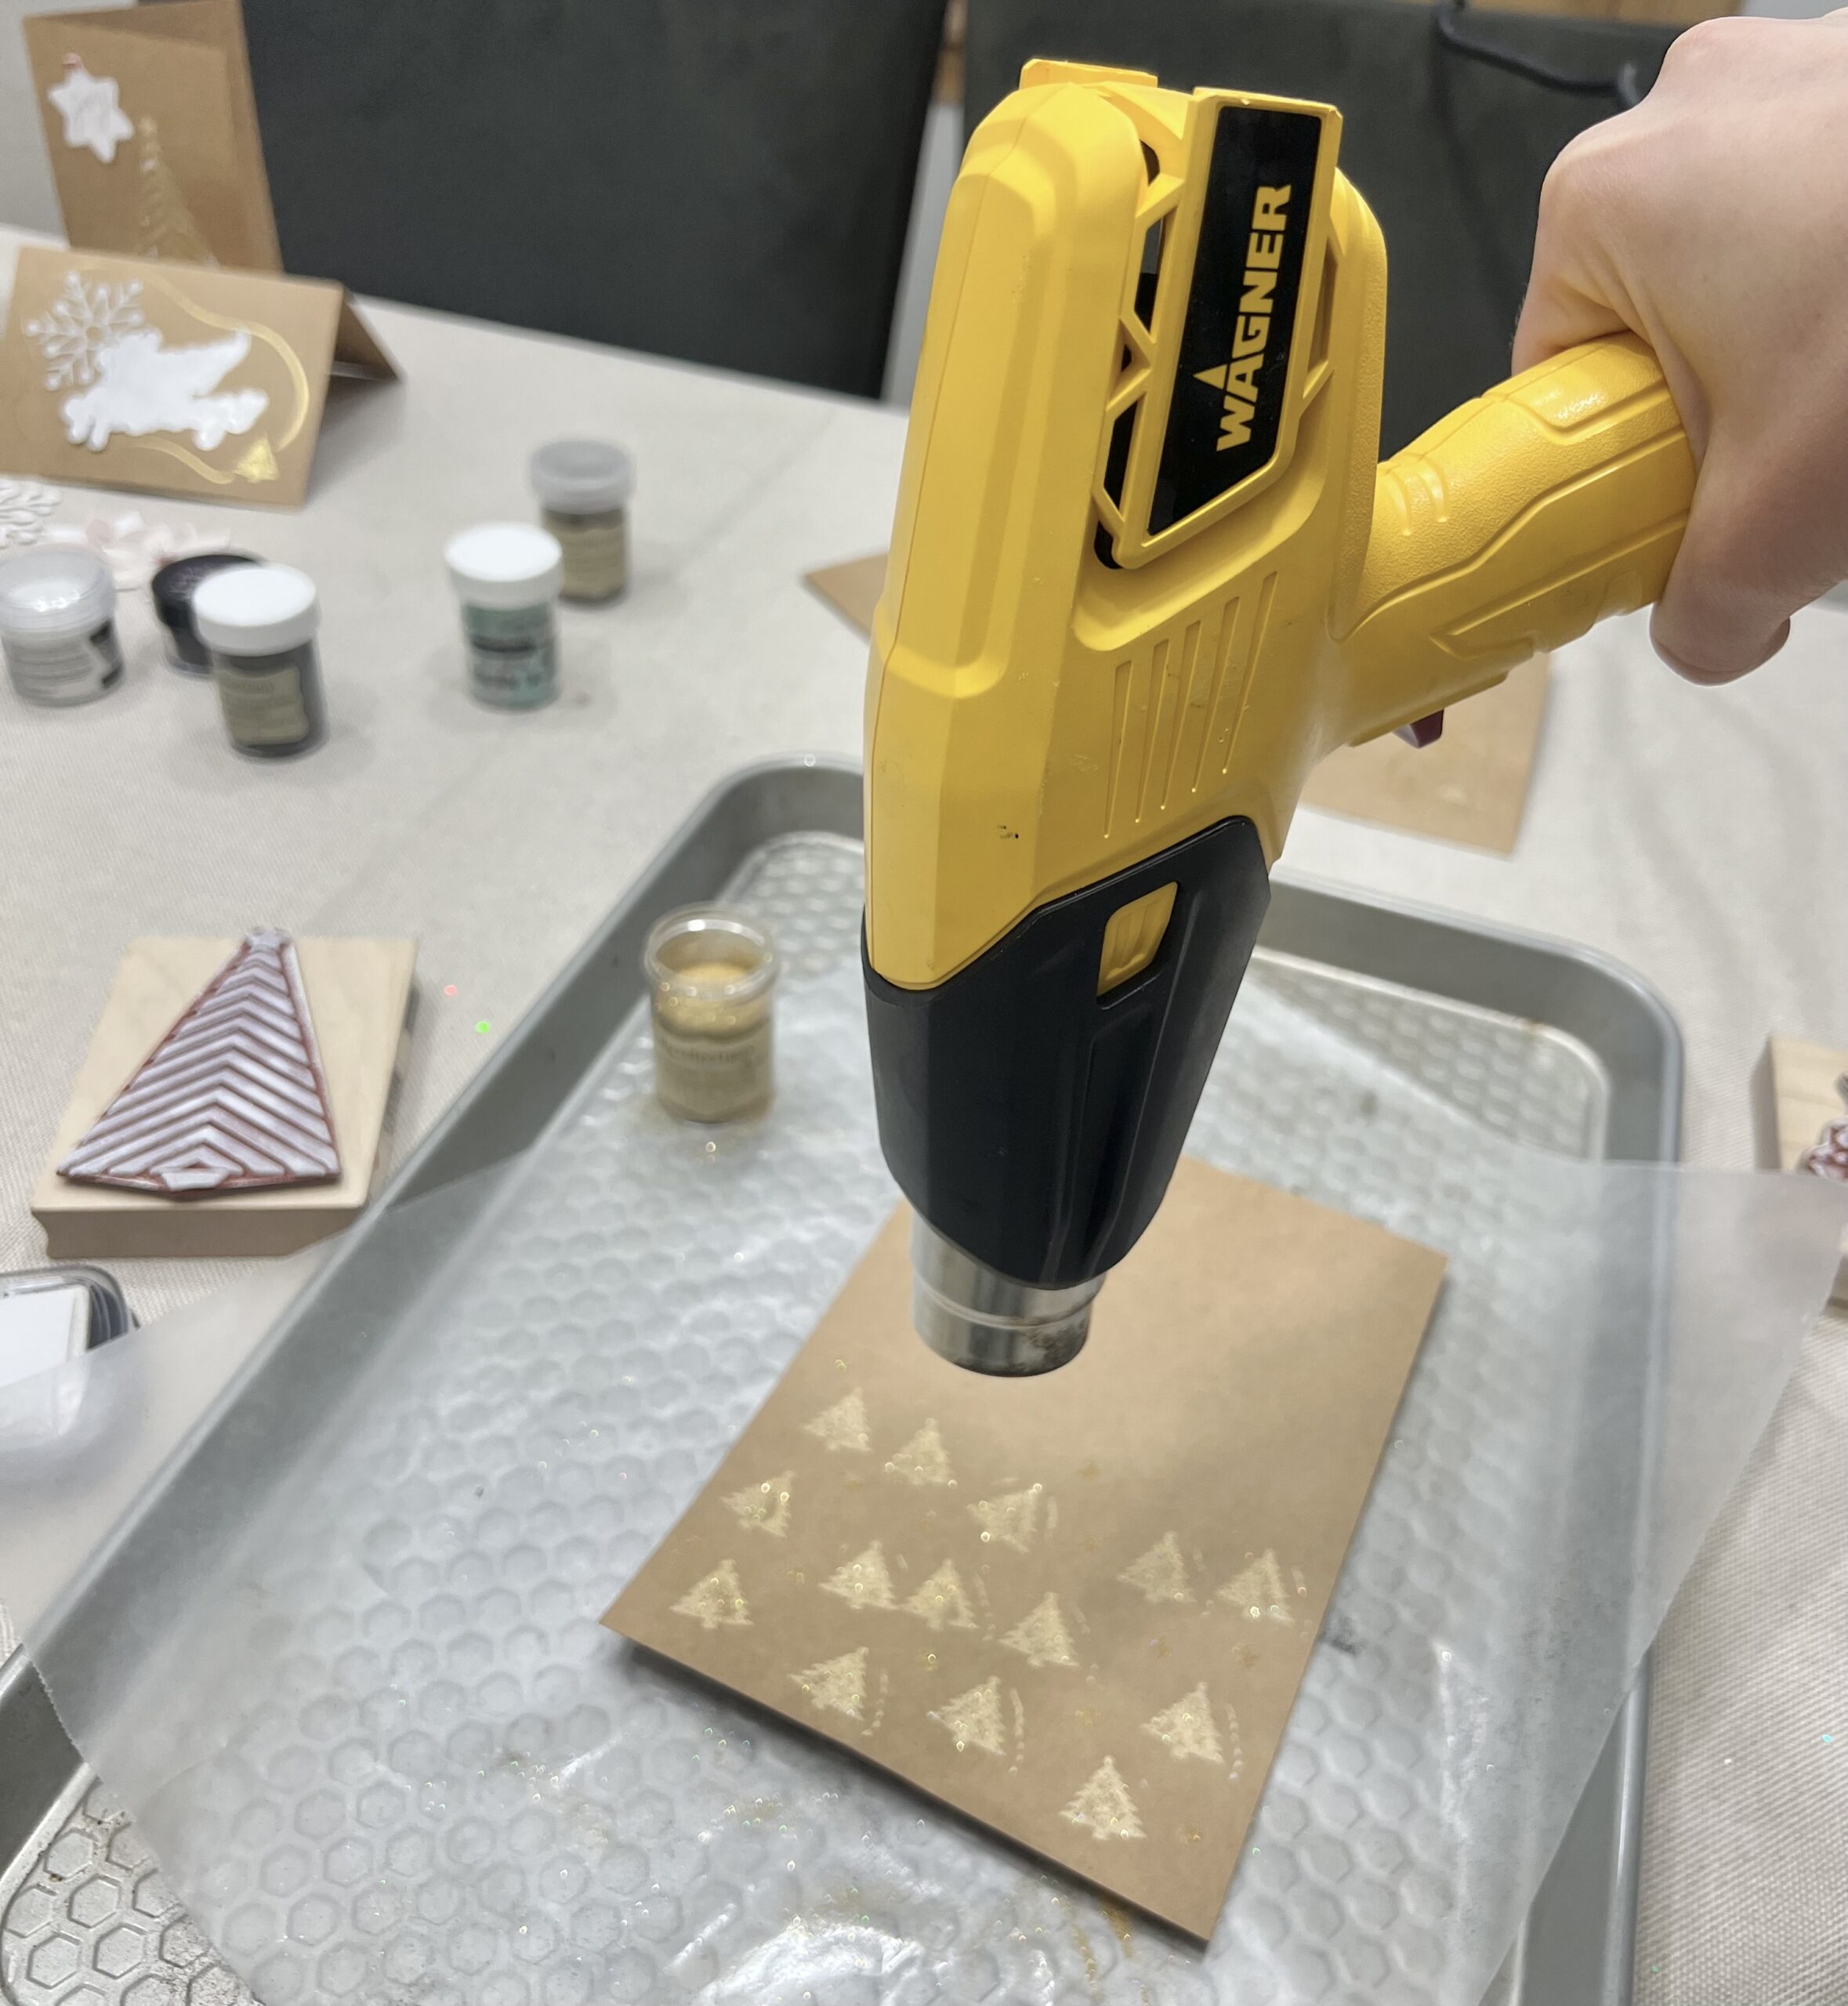 Embossing mini Christmas trees with a Wagner heat gun